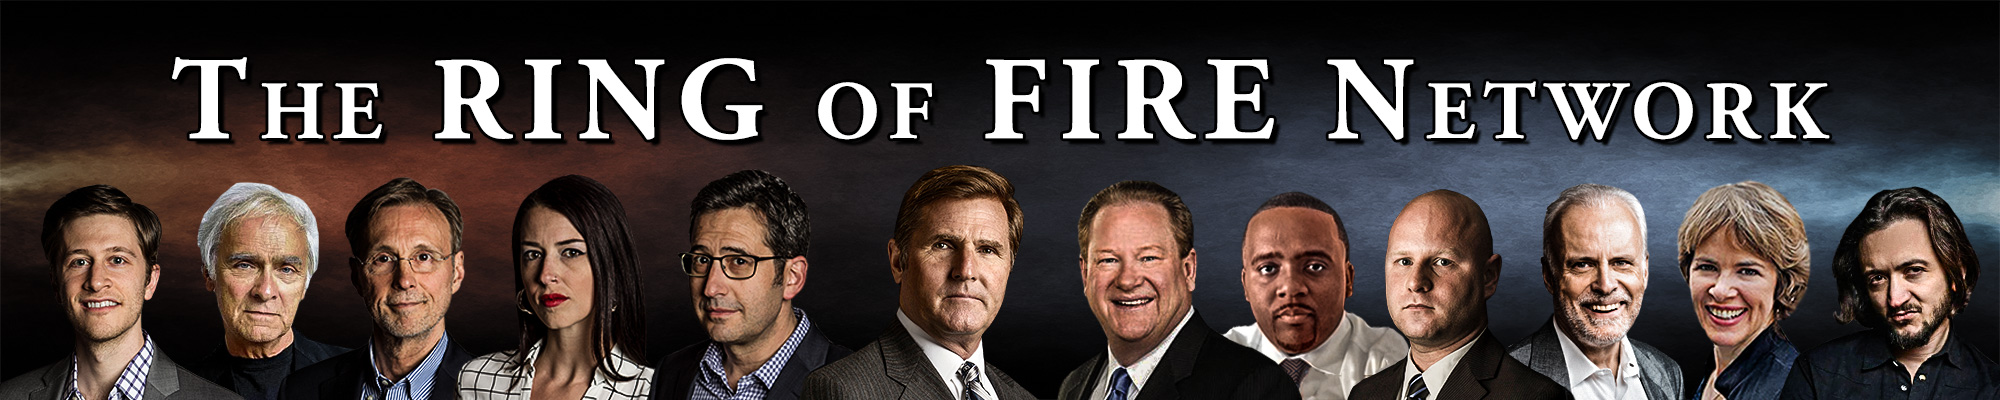 The Ring of Fire Network